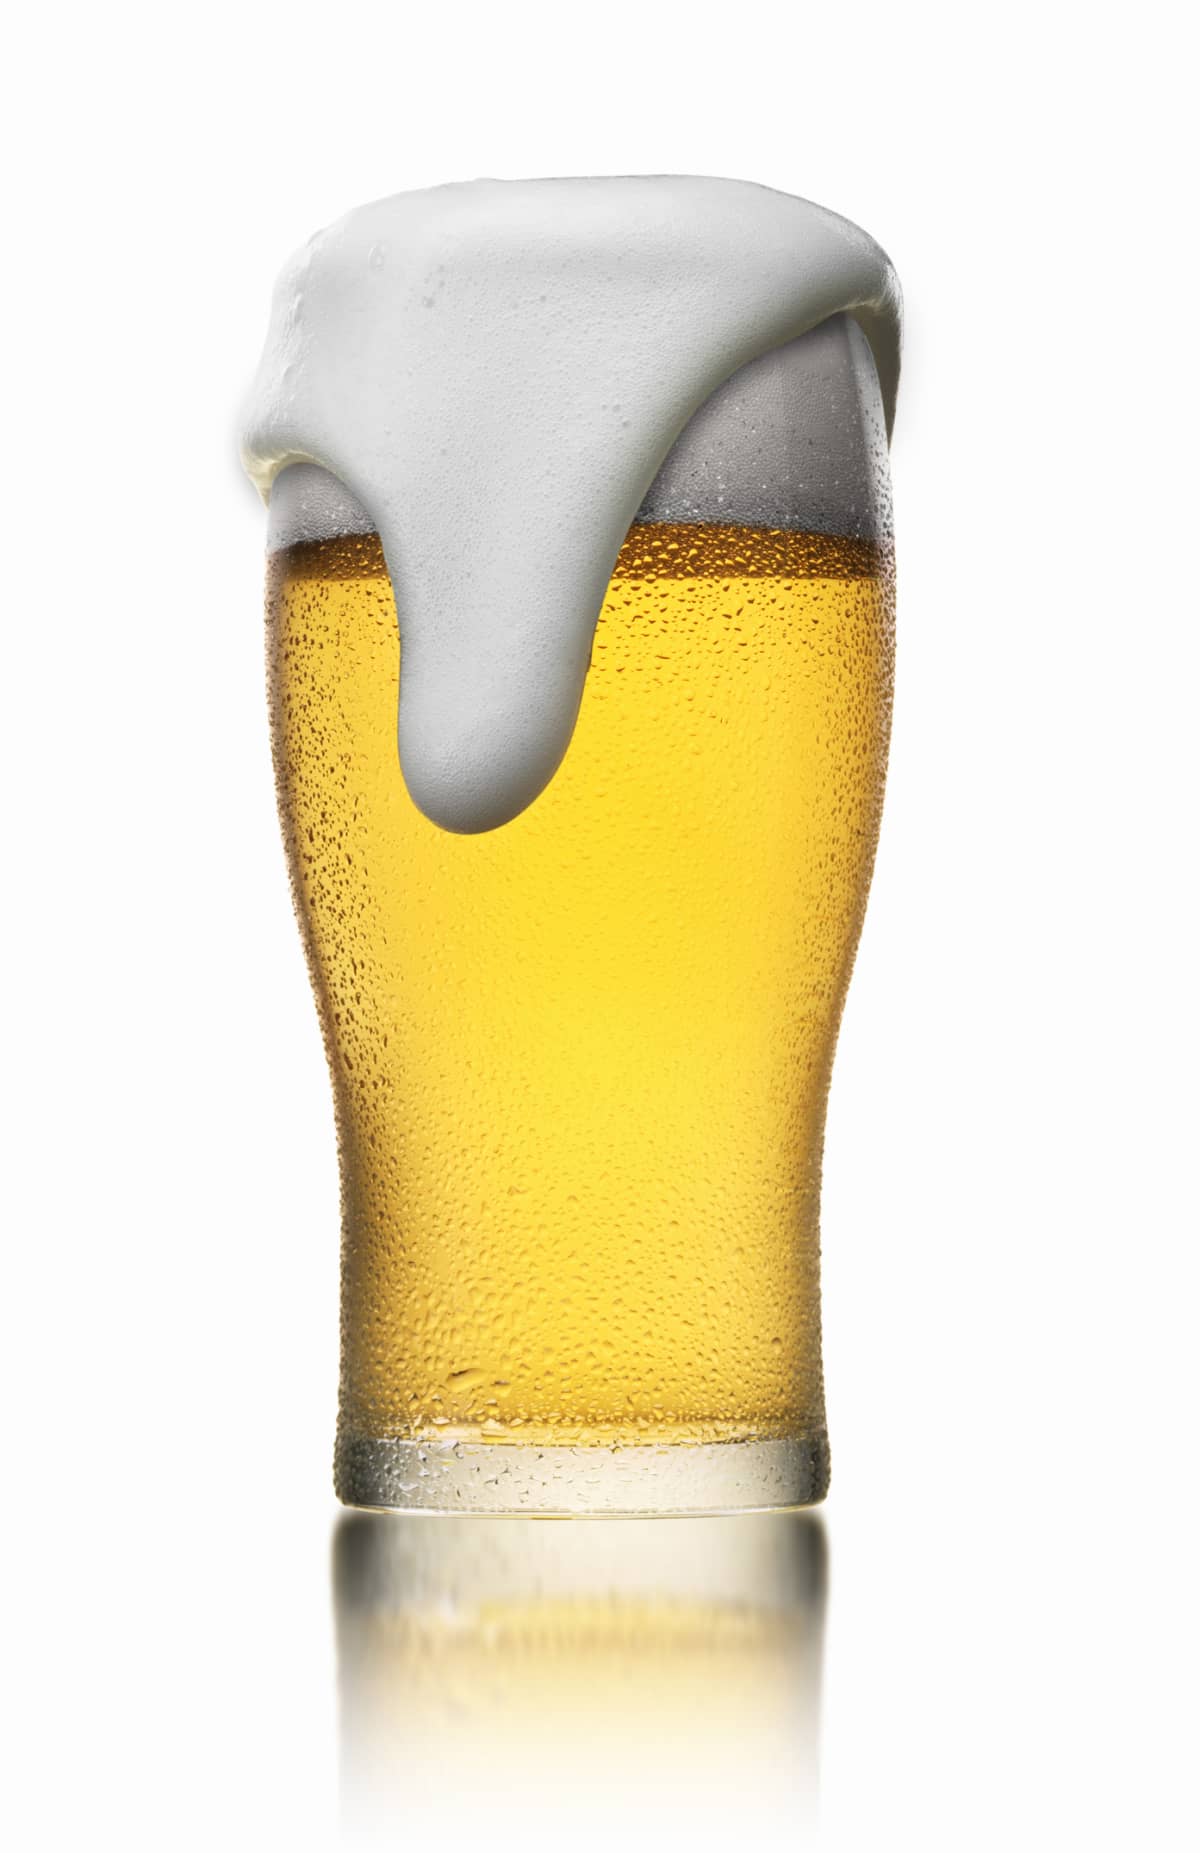 Glass of beer with overflowing foam